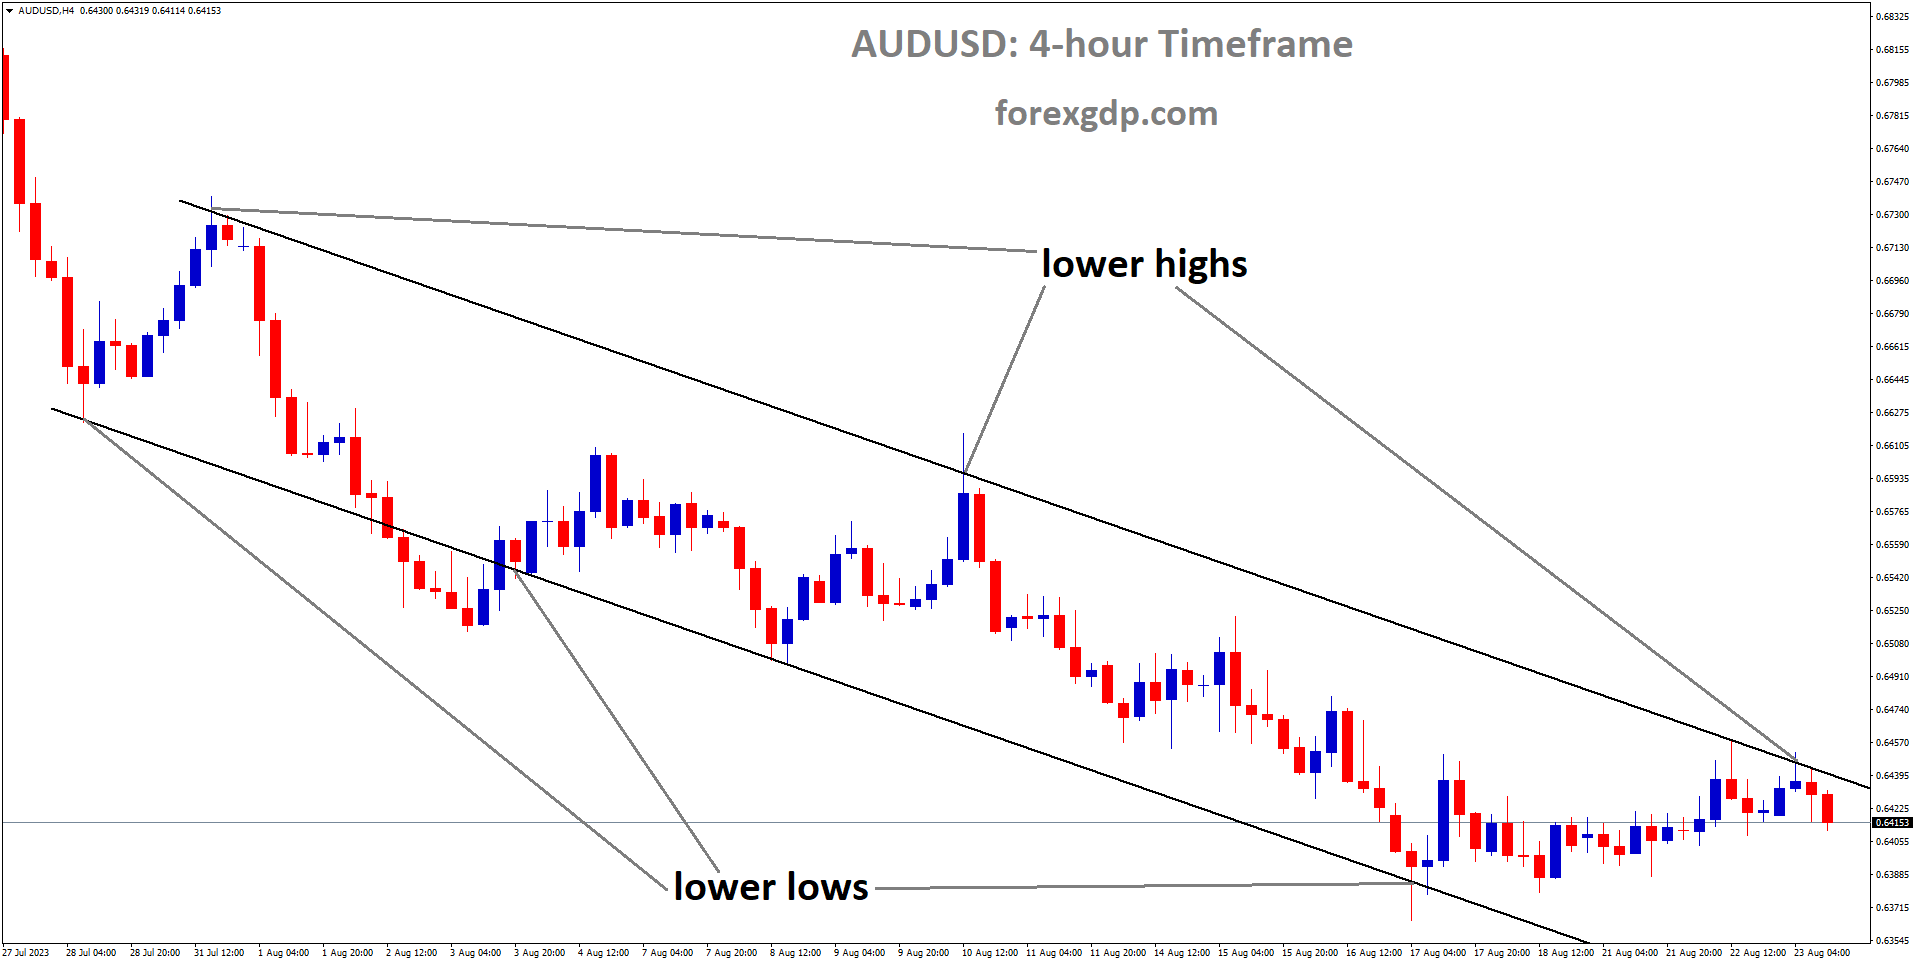 AUDUSD is moving in Descending channel and market has reached lowr high area of the channel